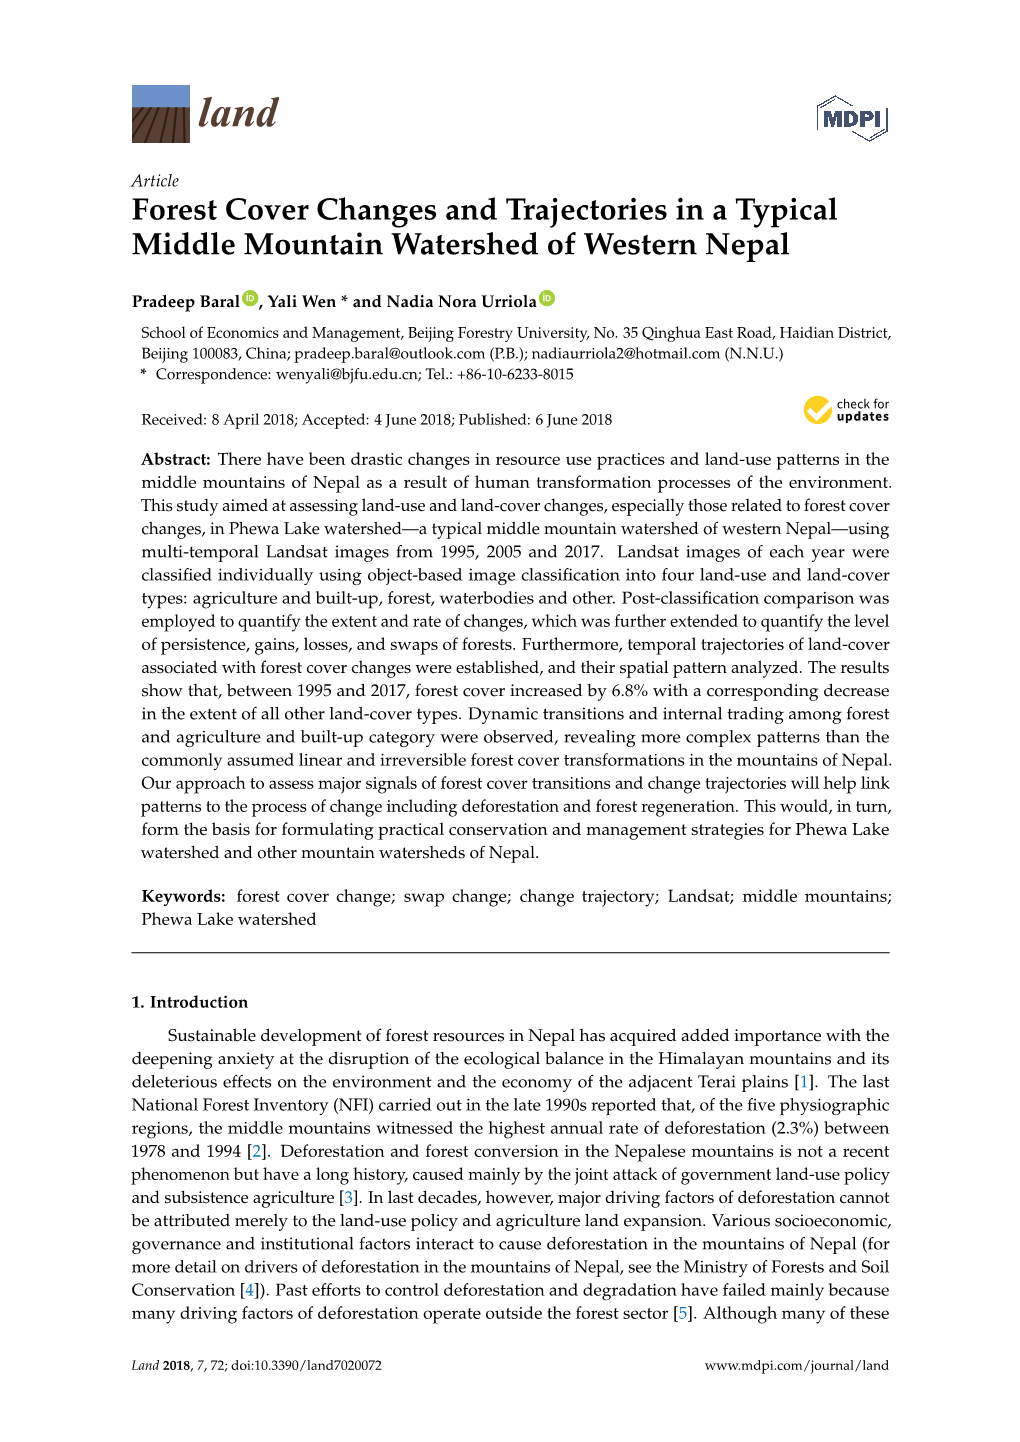 Forest Cover Changes and Trajectories in a Typical Middle Mountain Watershed of Western Nepal